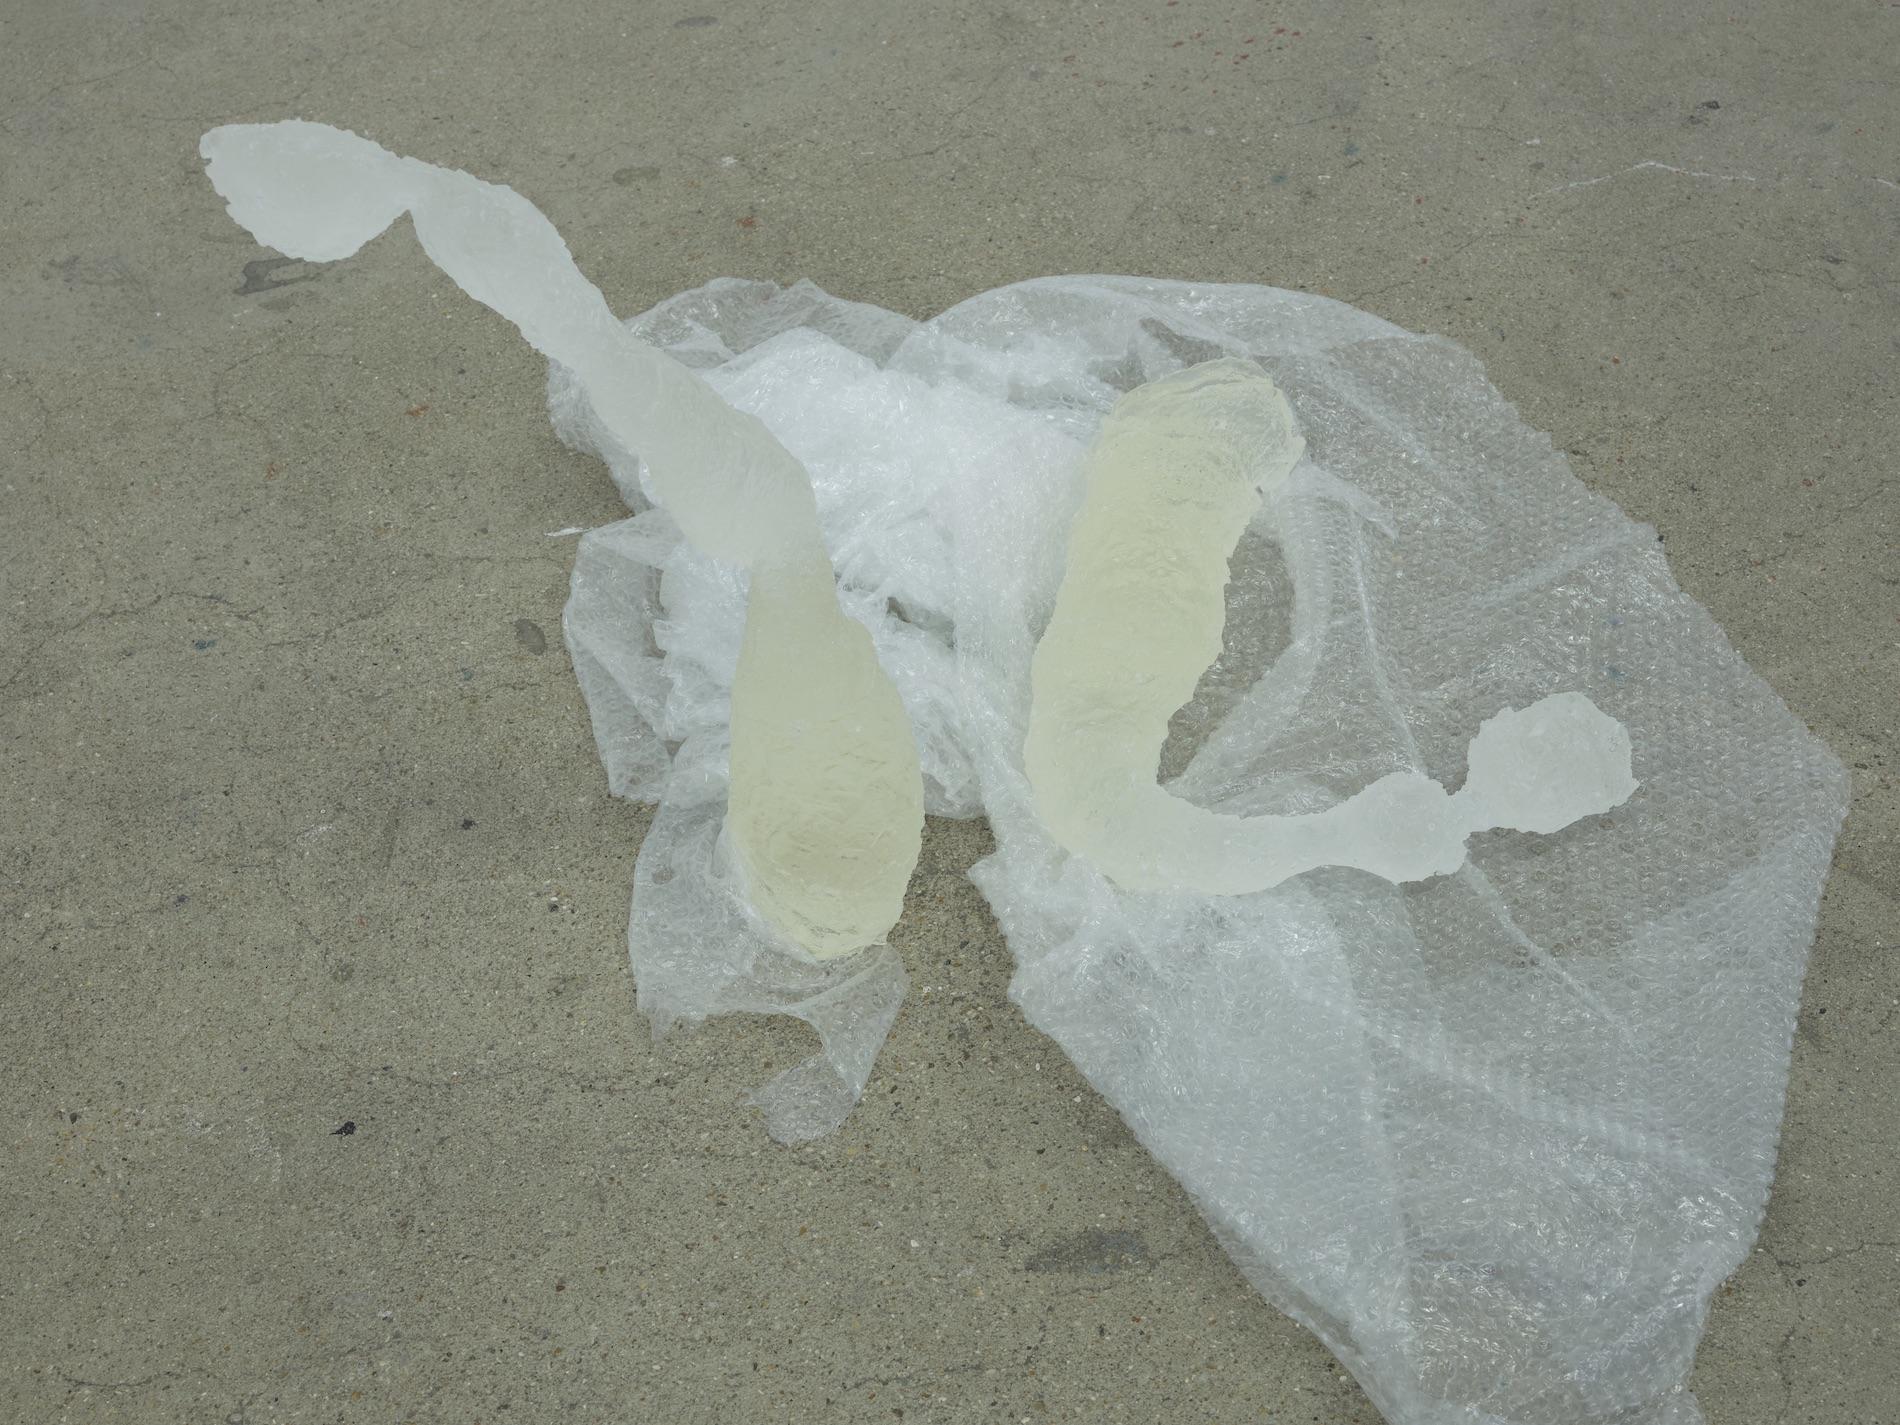 She’s Thrown a Shoe, 2022, Resin sculptures, resin legs concrete, bubble wrap, approximately 1.5 ft x 1-4 in. Meghan Murphy